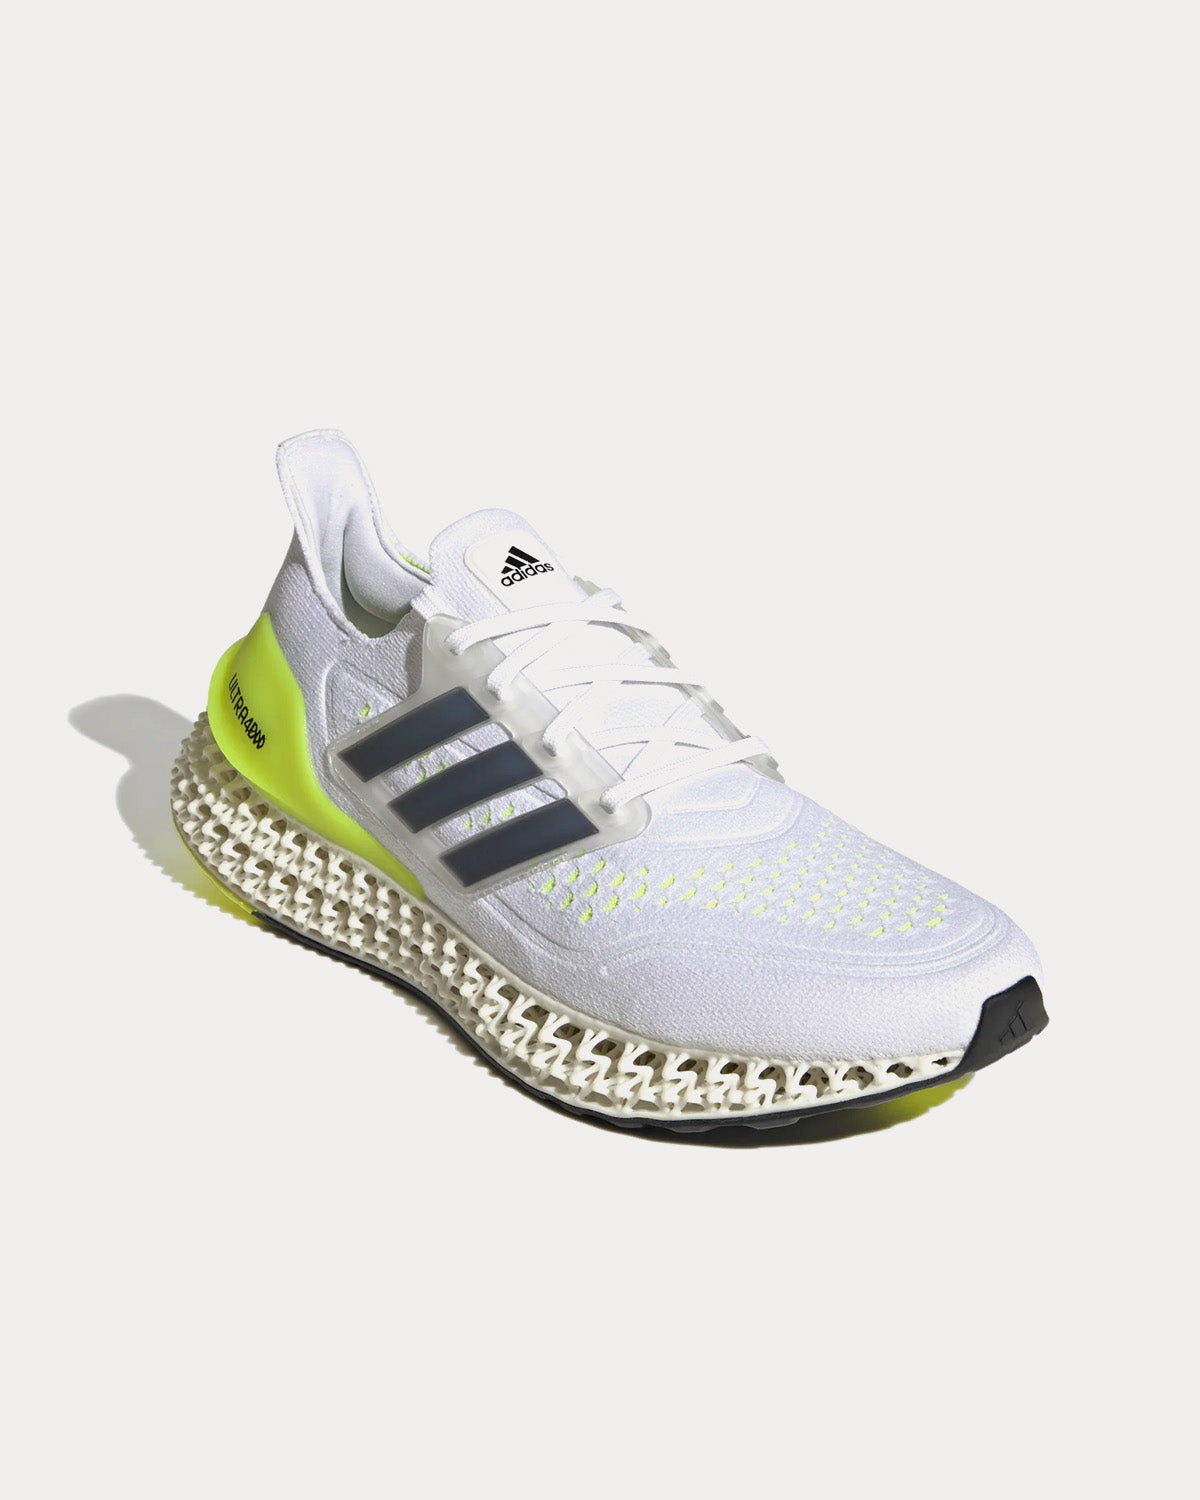 Adidas - Ultra 4DFWD Cloud White / Core Black / Solar Yellow Running Shoes